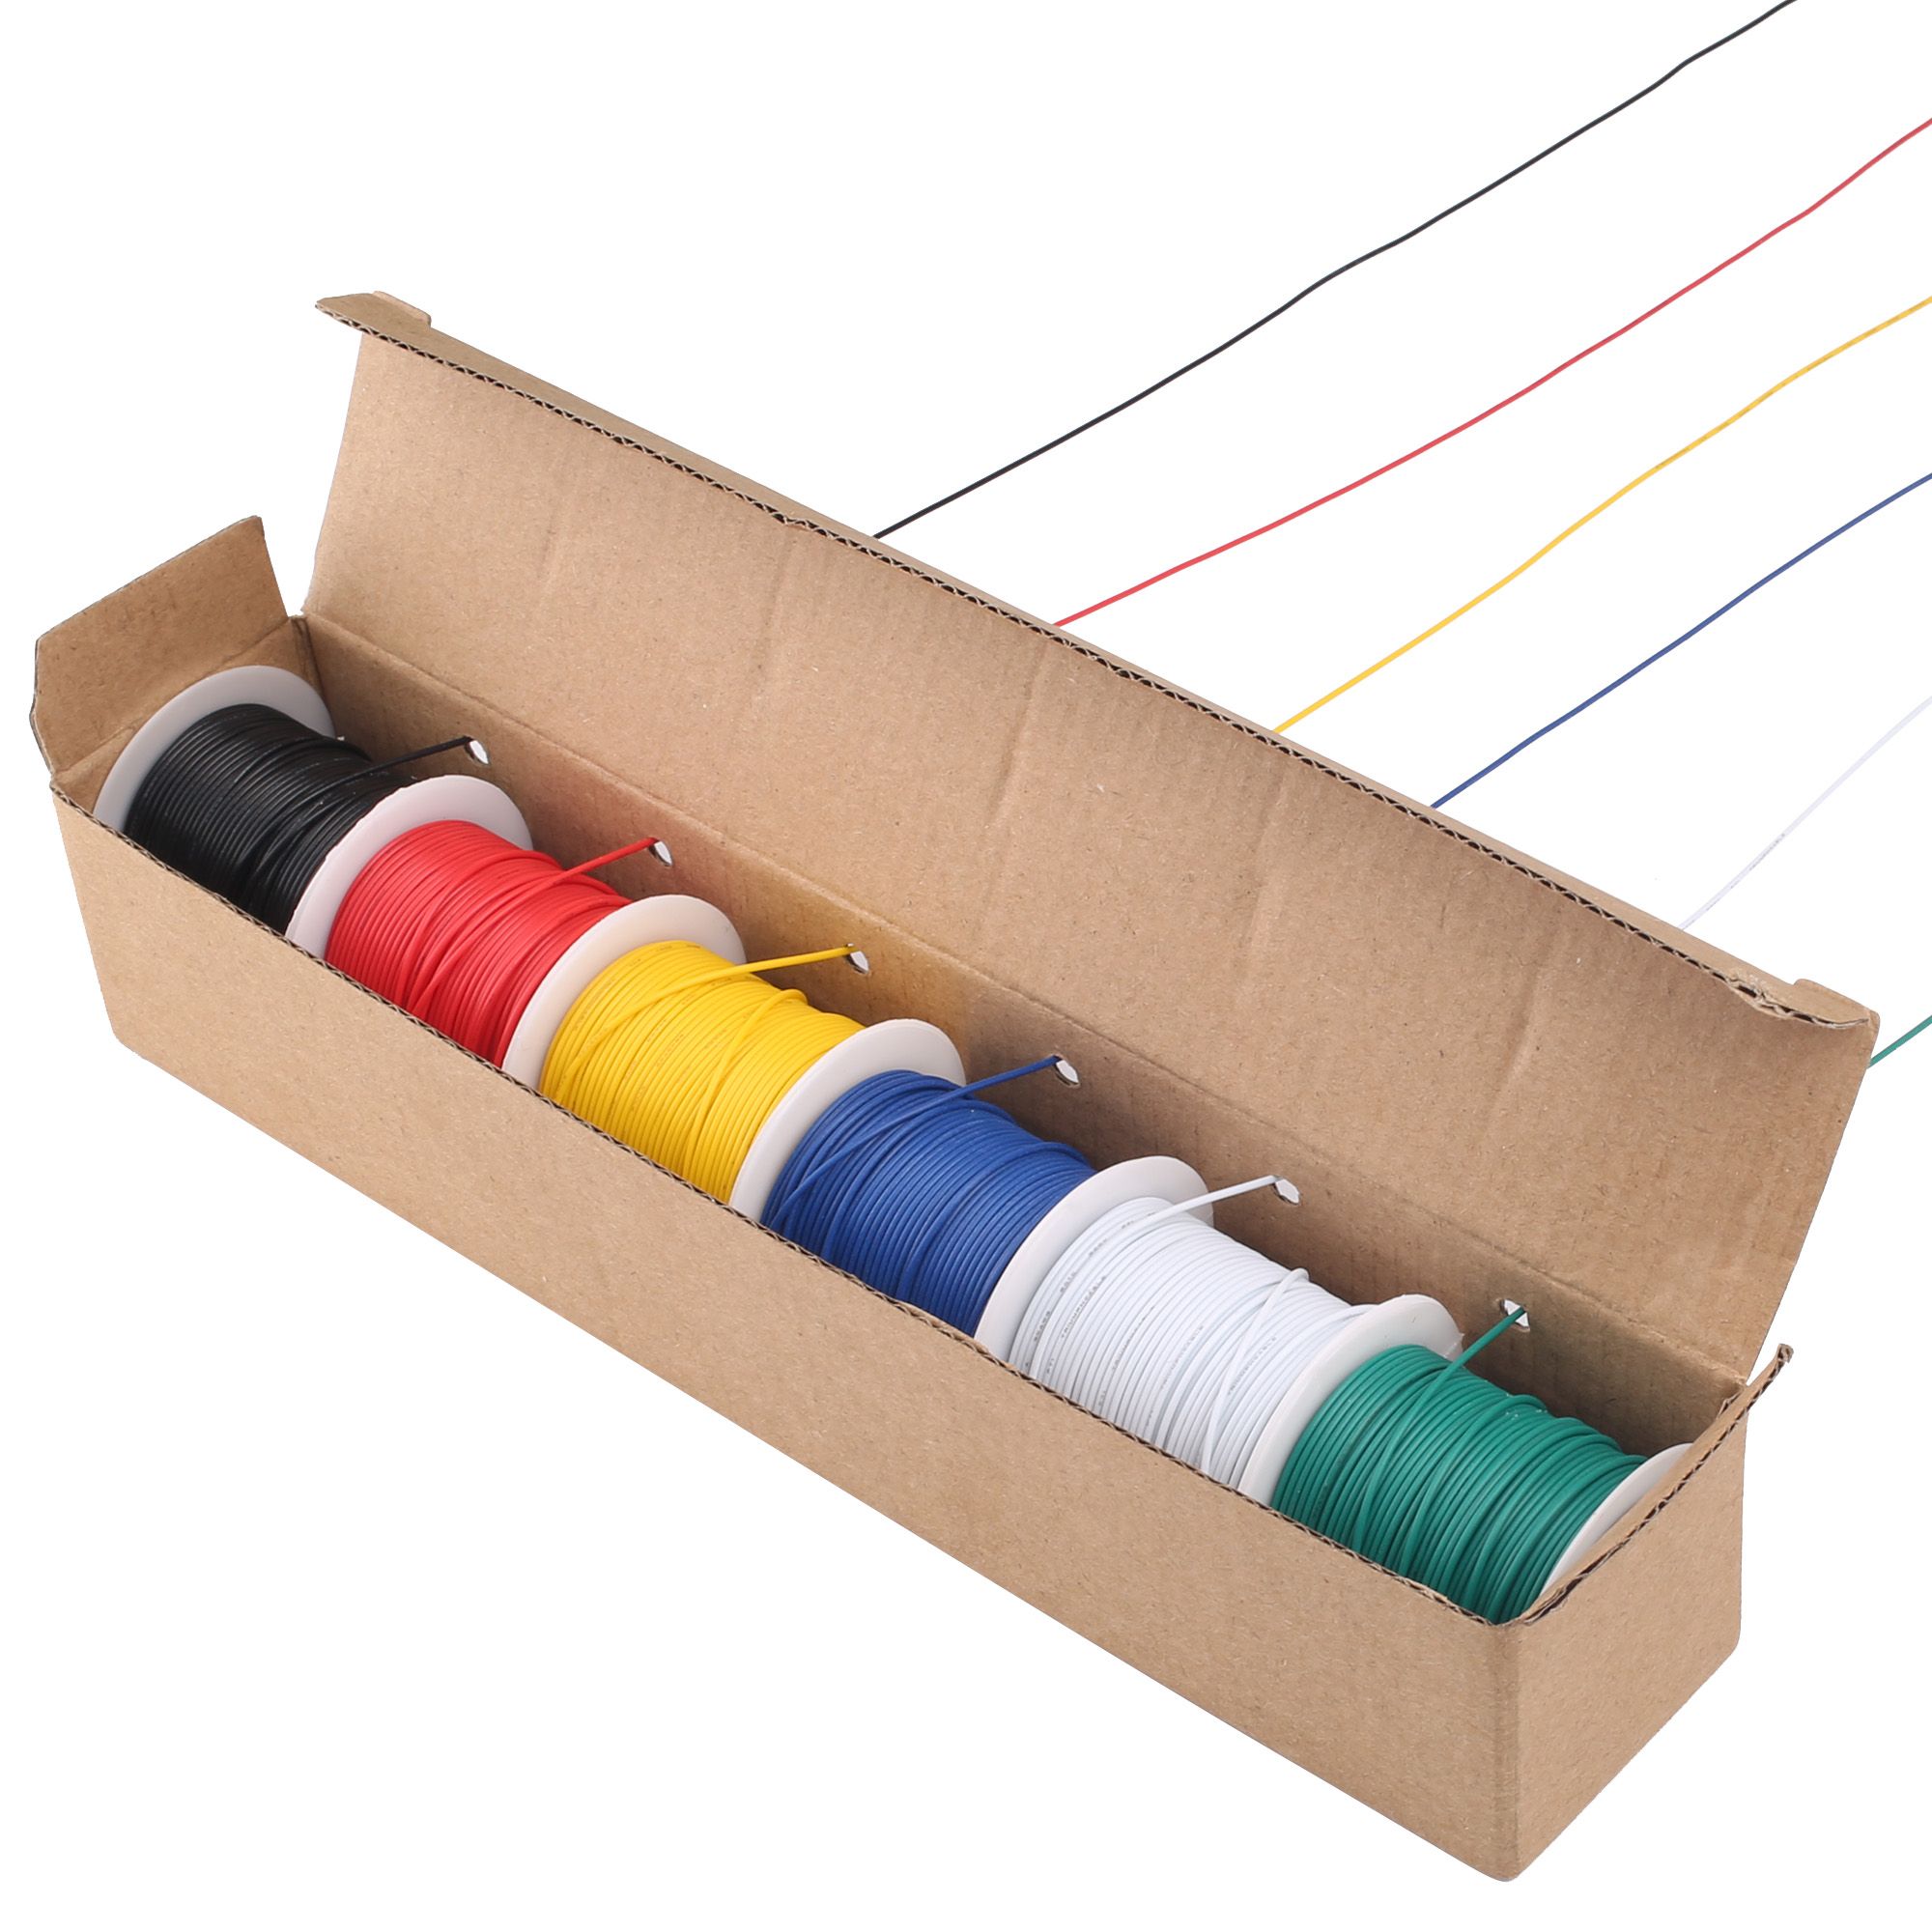 LotFancy 30AWG Stranded Wire, 6 Colors (30 feet/9 m Each) Electrical Wire, UL Listed - image 1 of 8